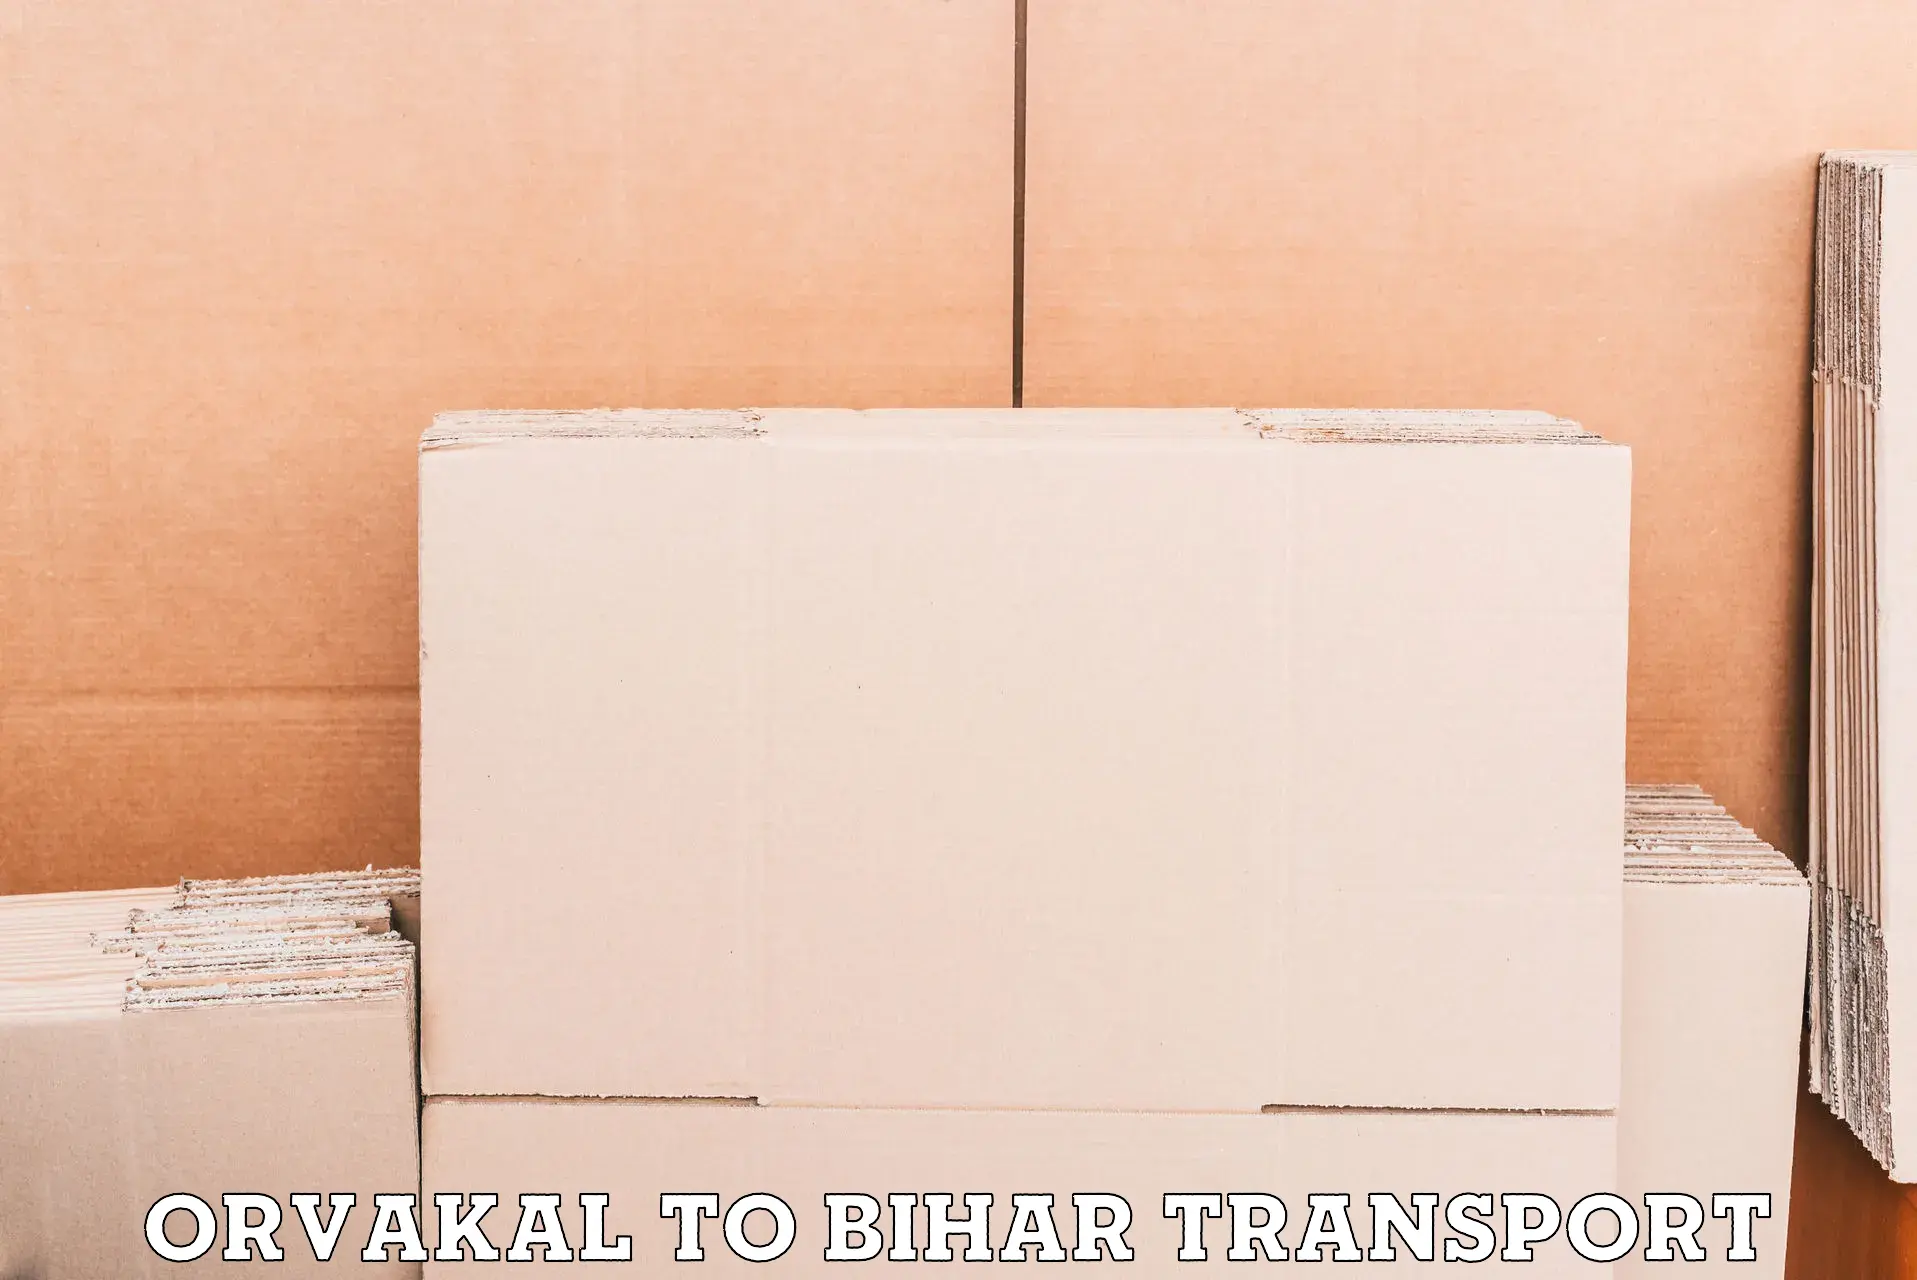 Express transport services Orvakal to Chainpur